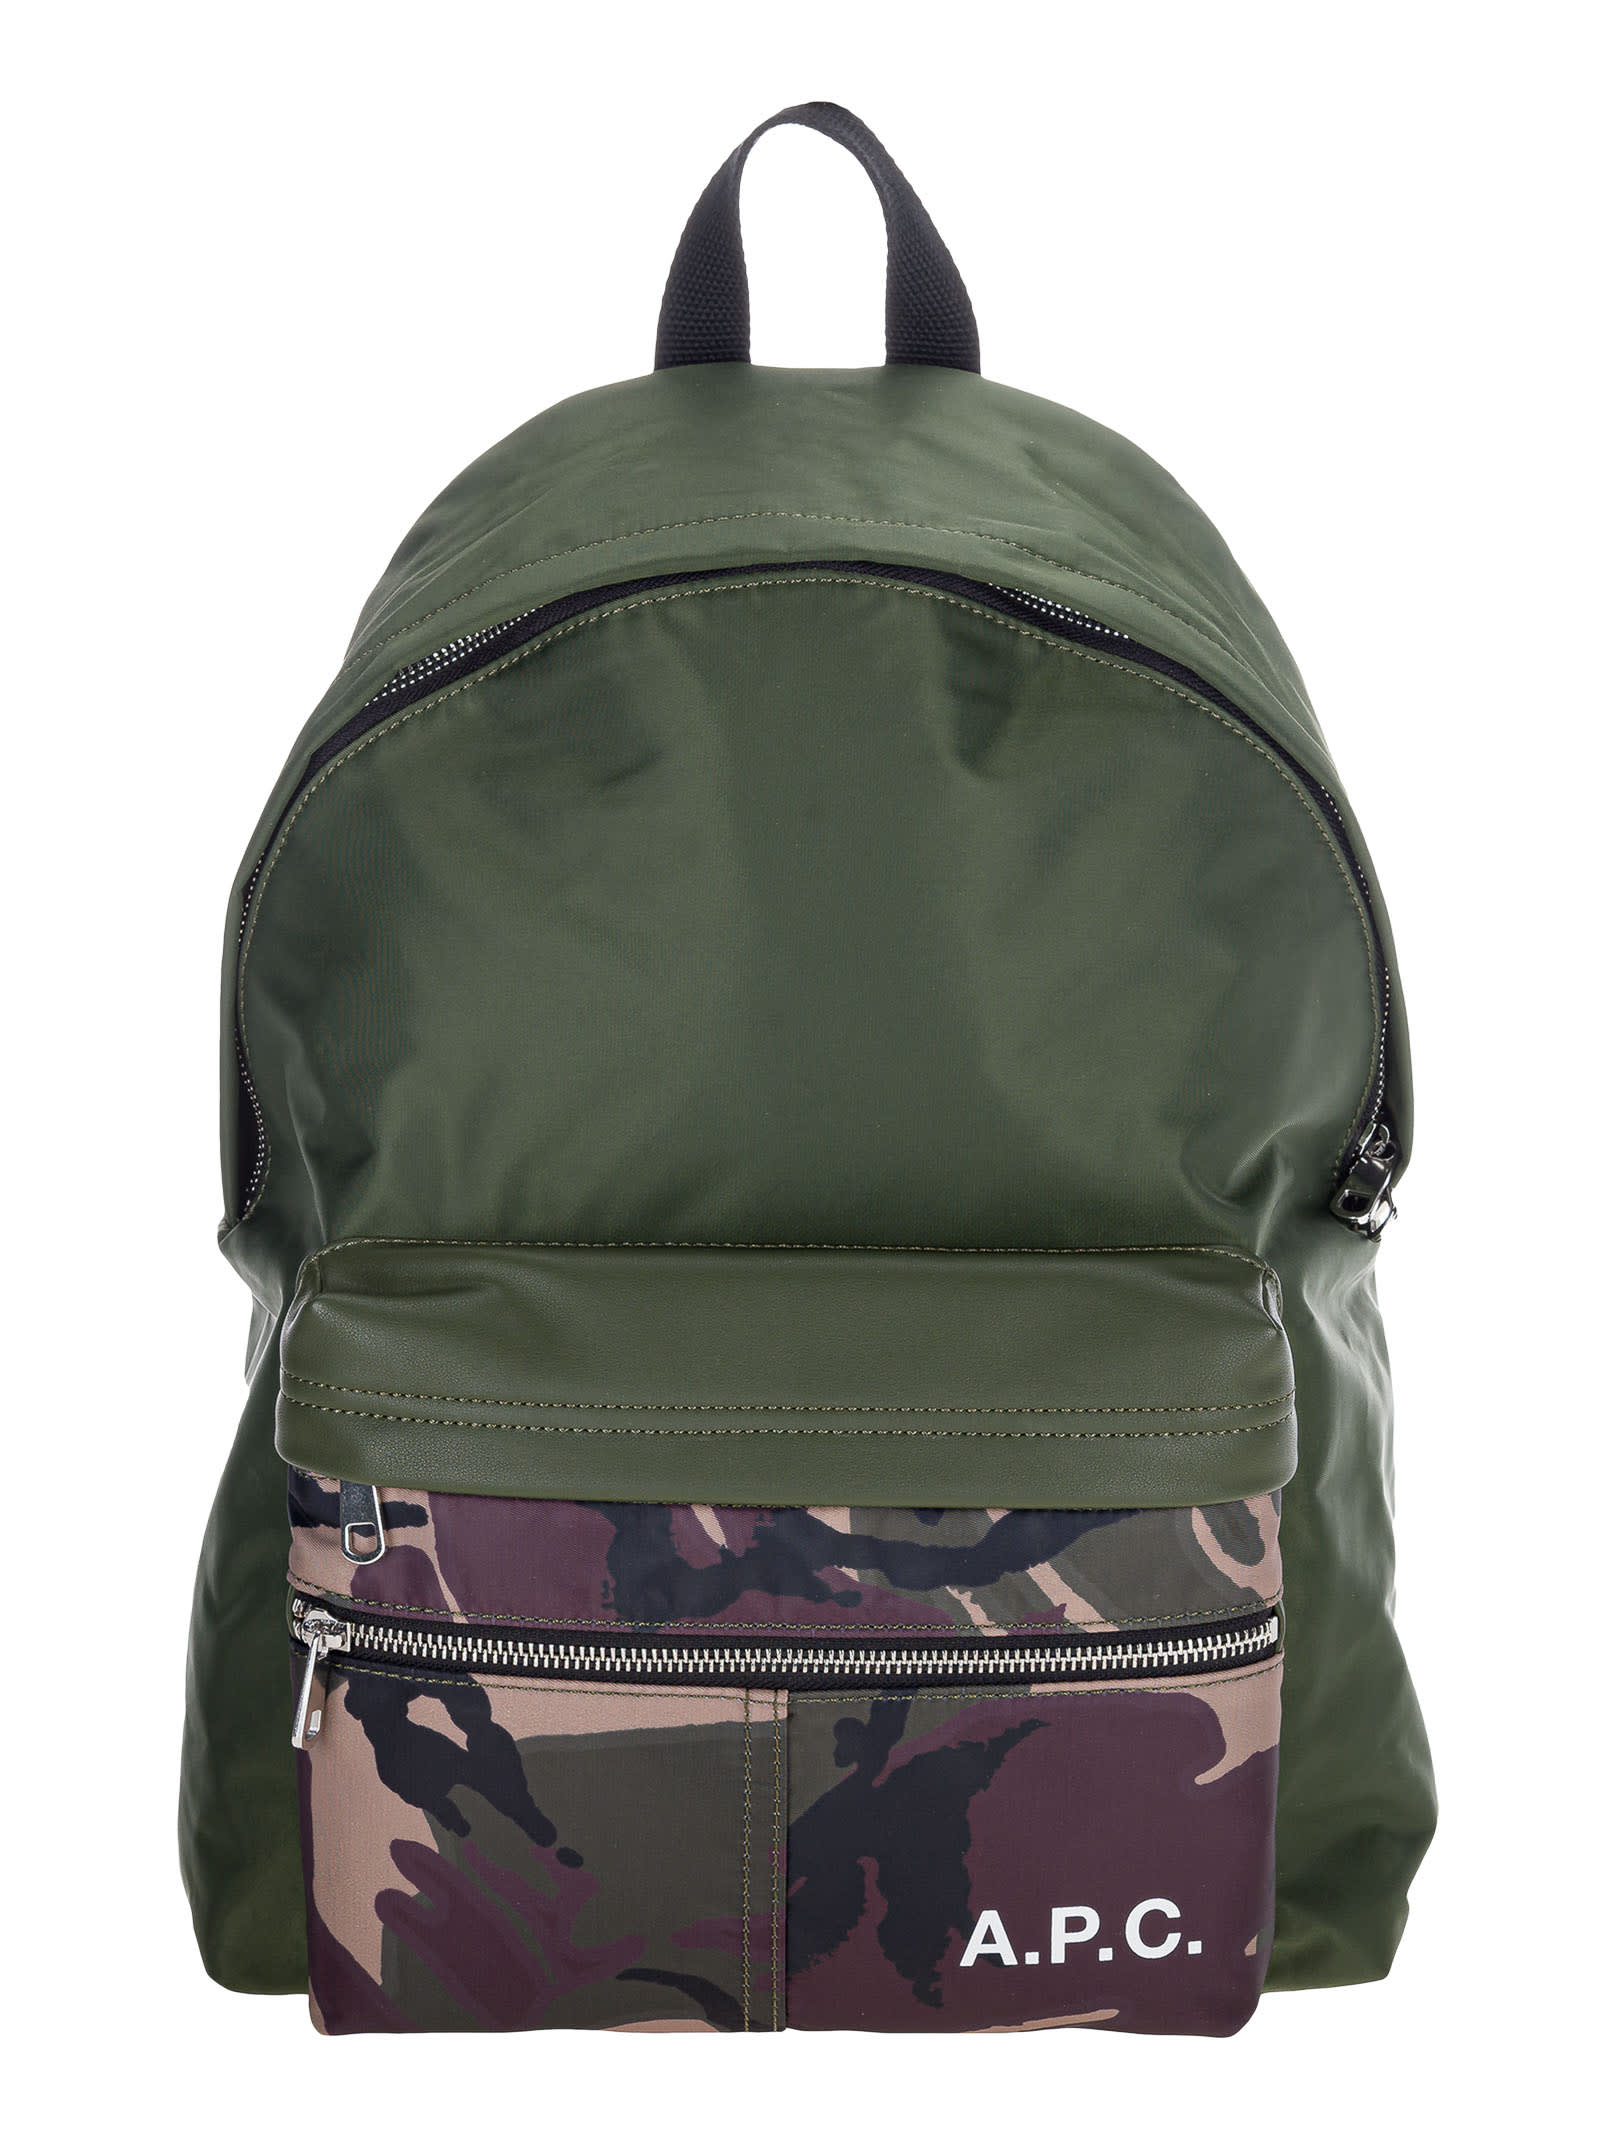 A.p.c. Camouflage Camden Backpack